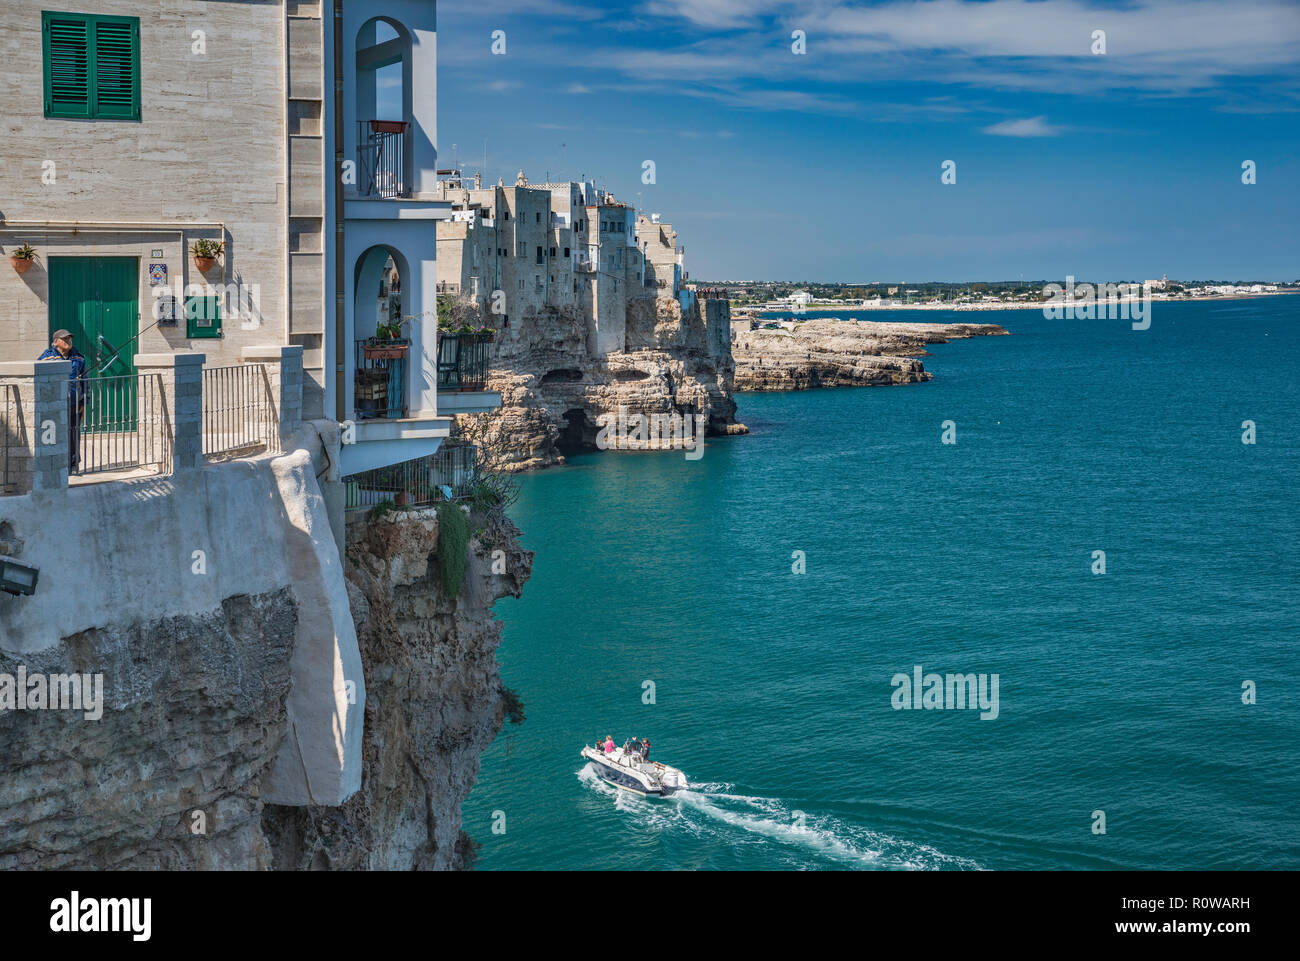 Houses perched on rocks above Adriatic Sea, from Largo Ardito viewpoint, in Polignano a Mare, Apulia, Italy Stock Photo